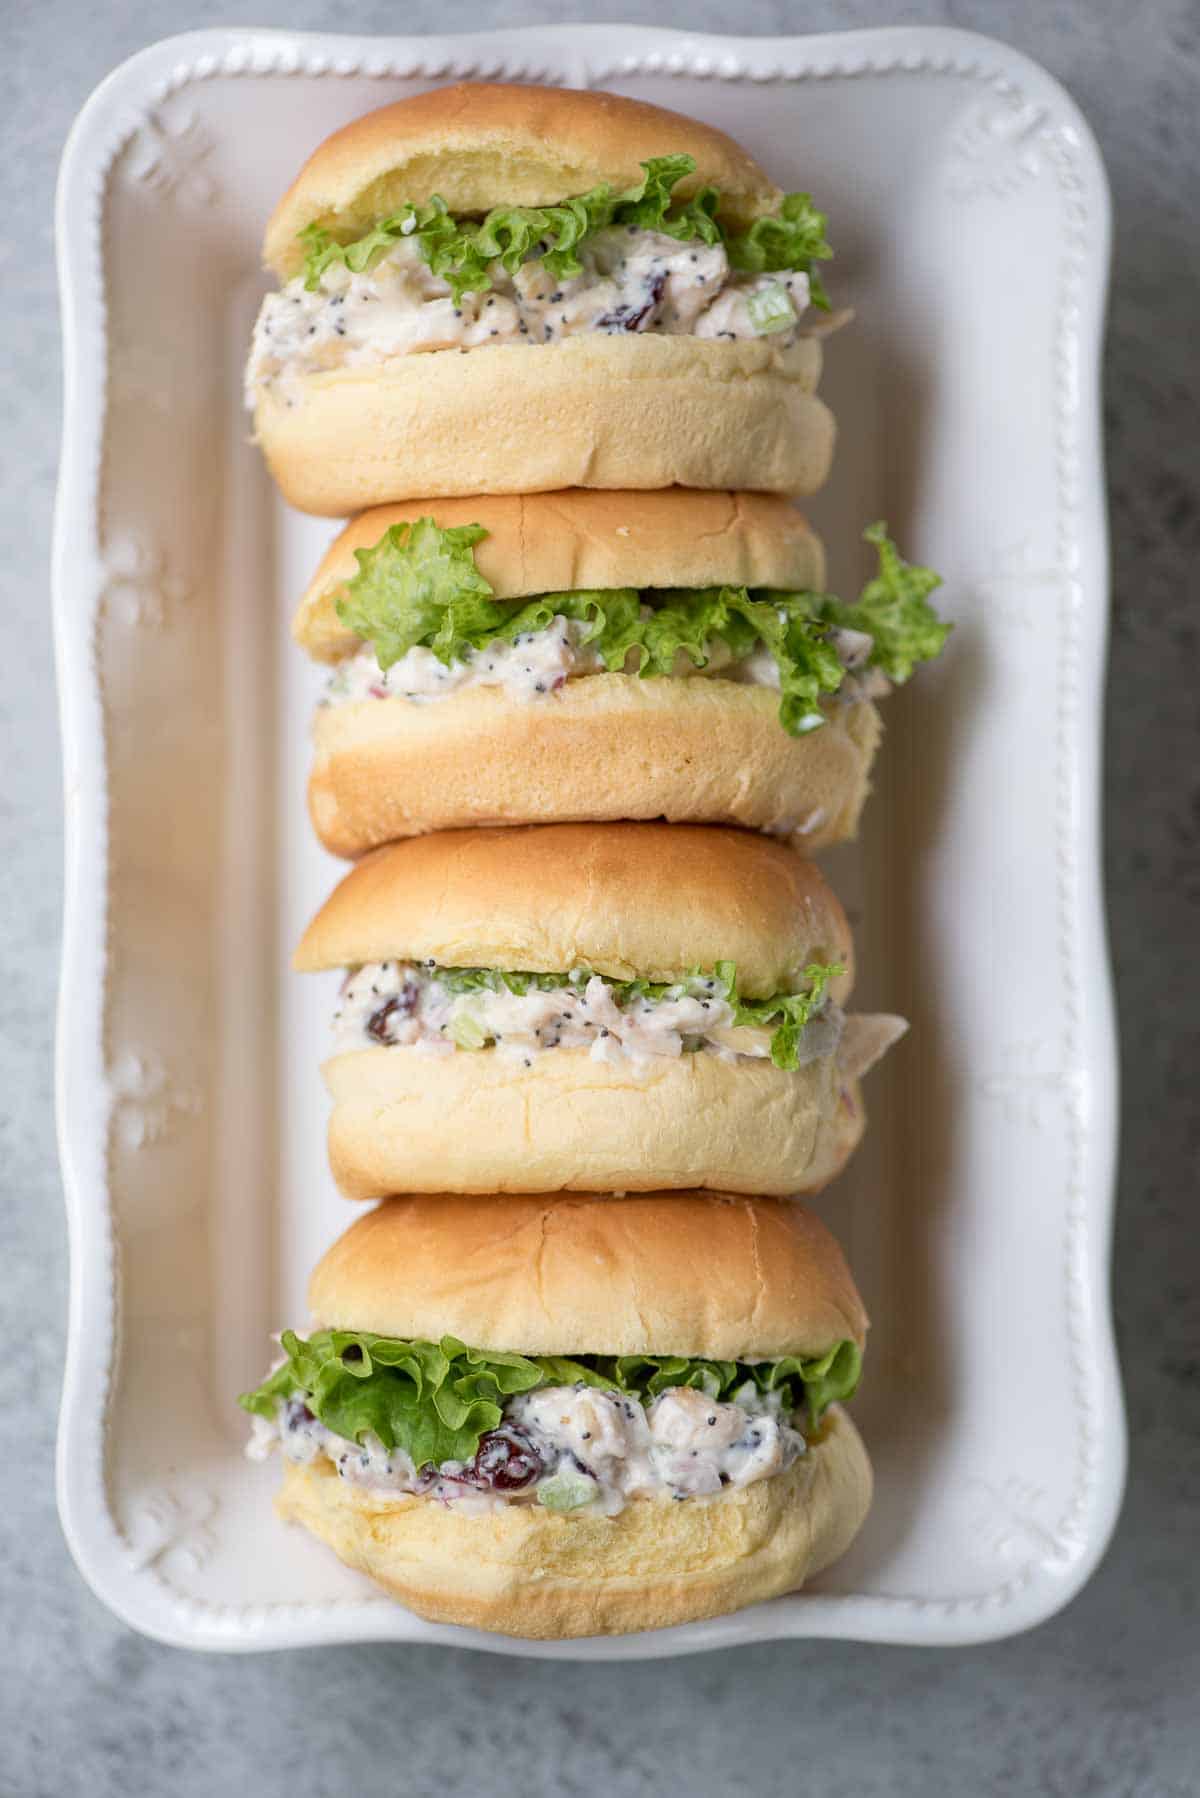 Cranberry chicken salad sandiwches on small buns in a white dish.